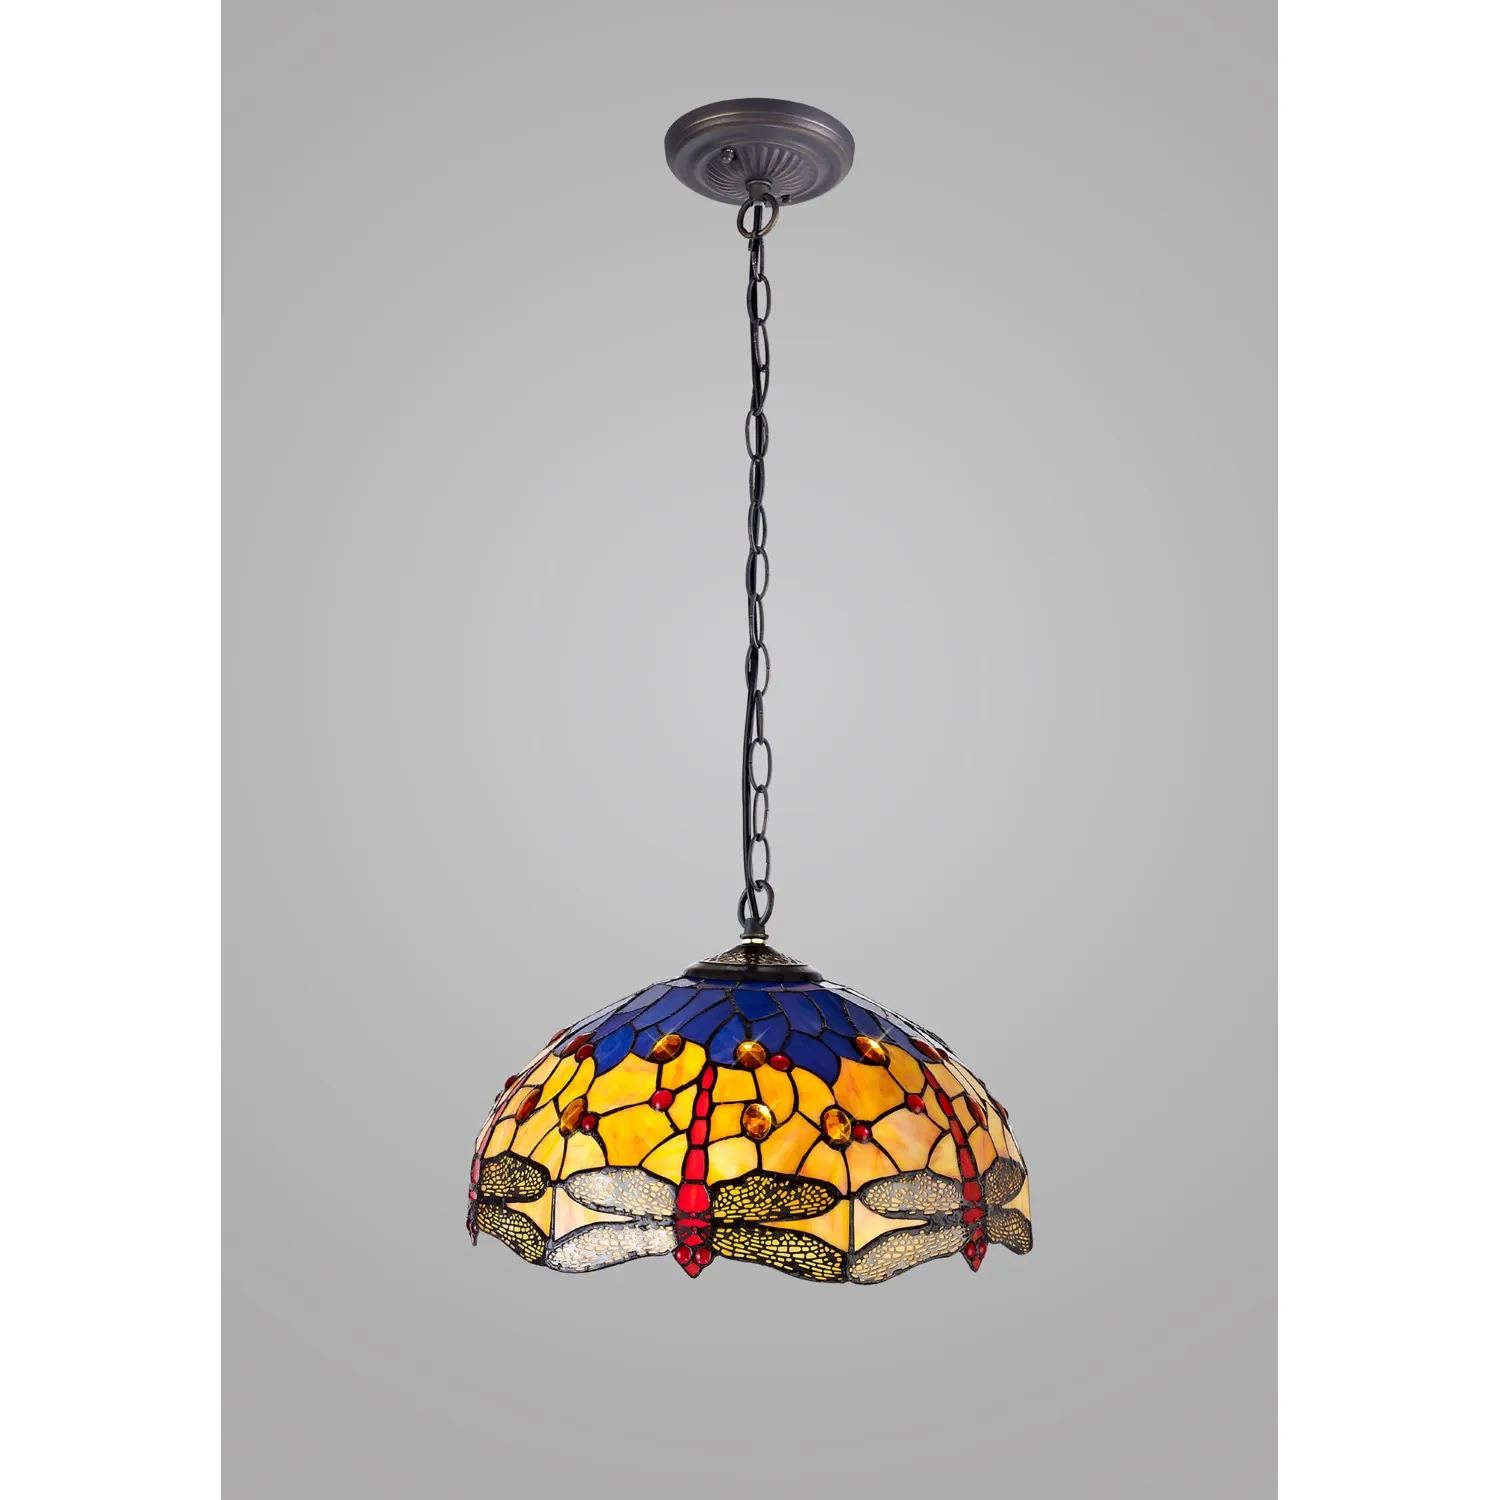 Hitchin 1 Light Downlighter Pendant E27 With 40cm Tiffany Shade, Blue Orange Crystal Aged Antique Brass